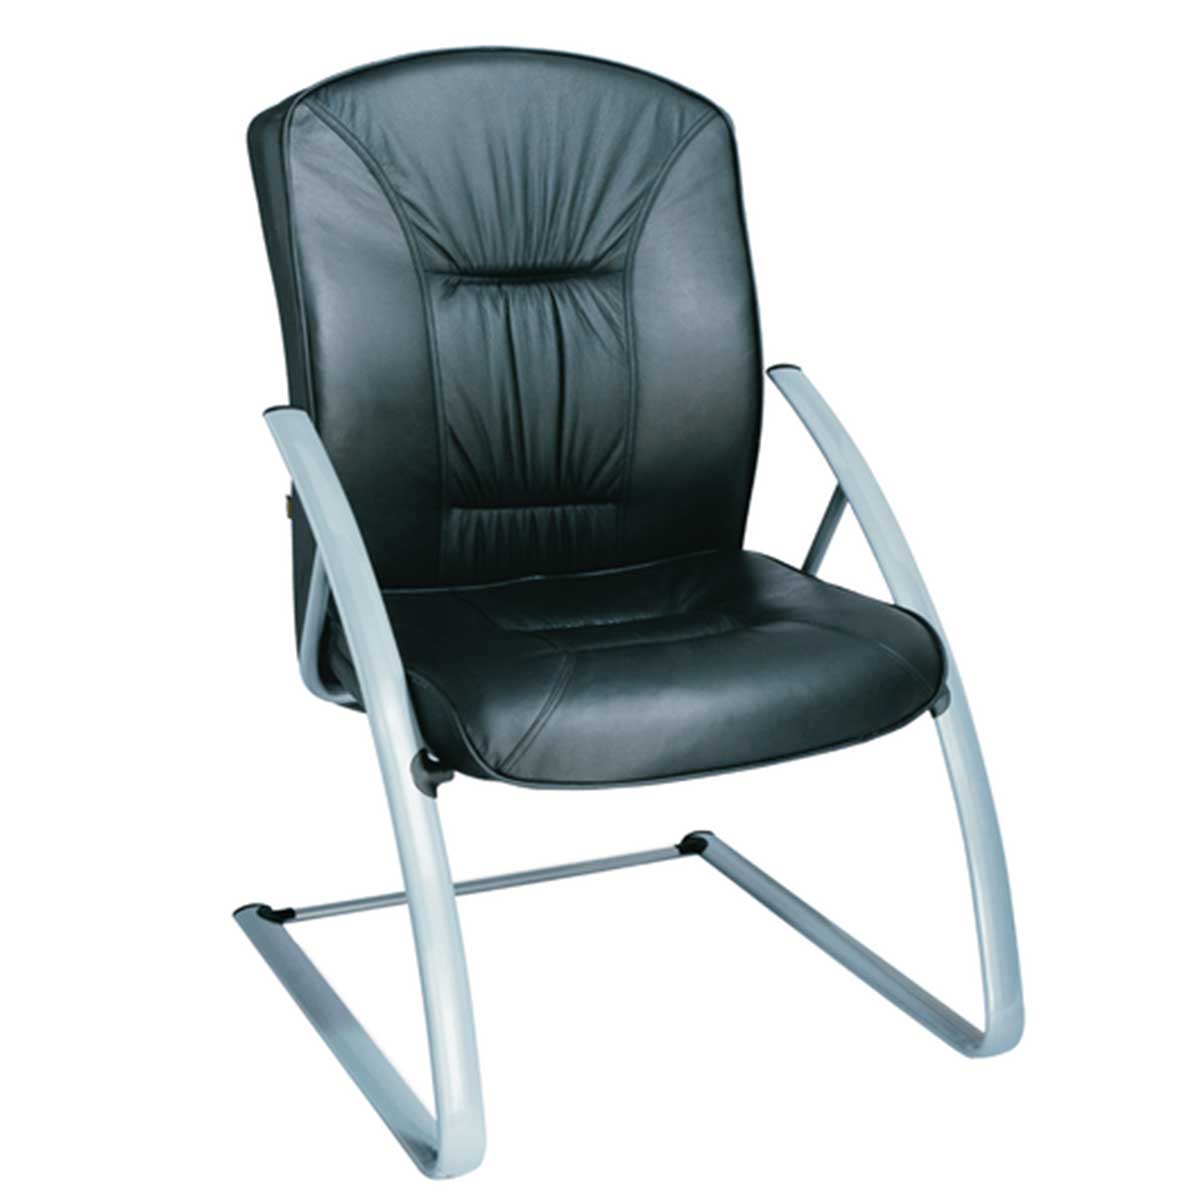 Leather office chair Manufacturers, Suppliers in Rohini Sector 25